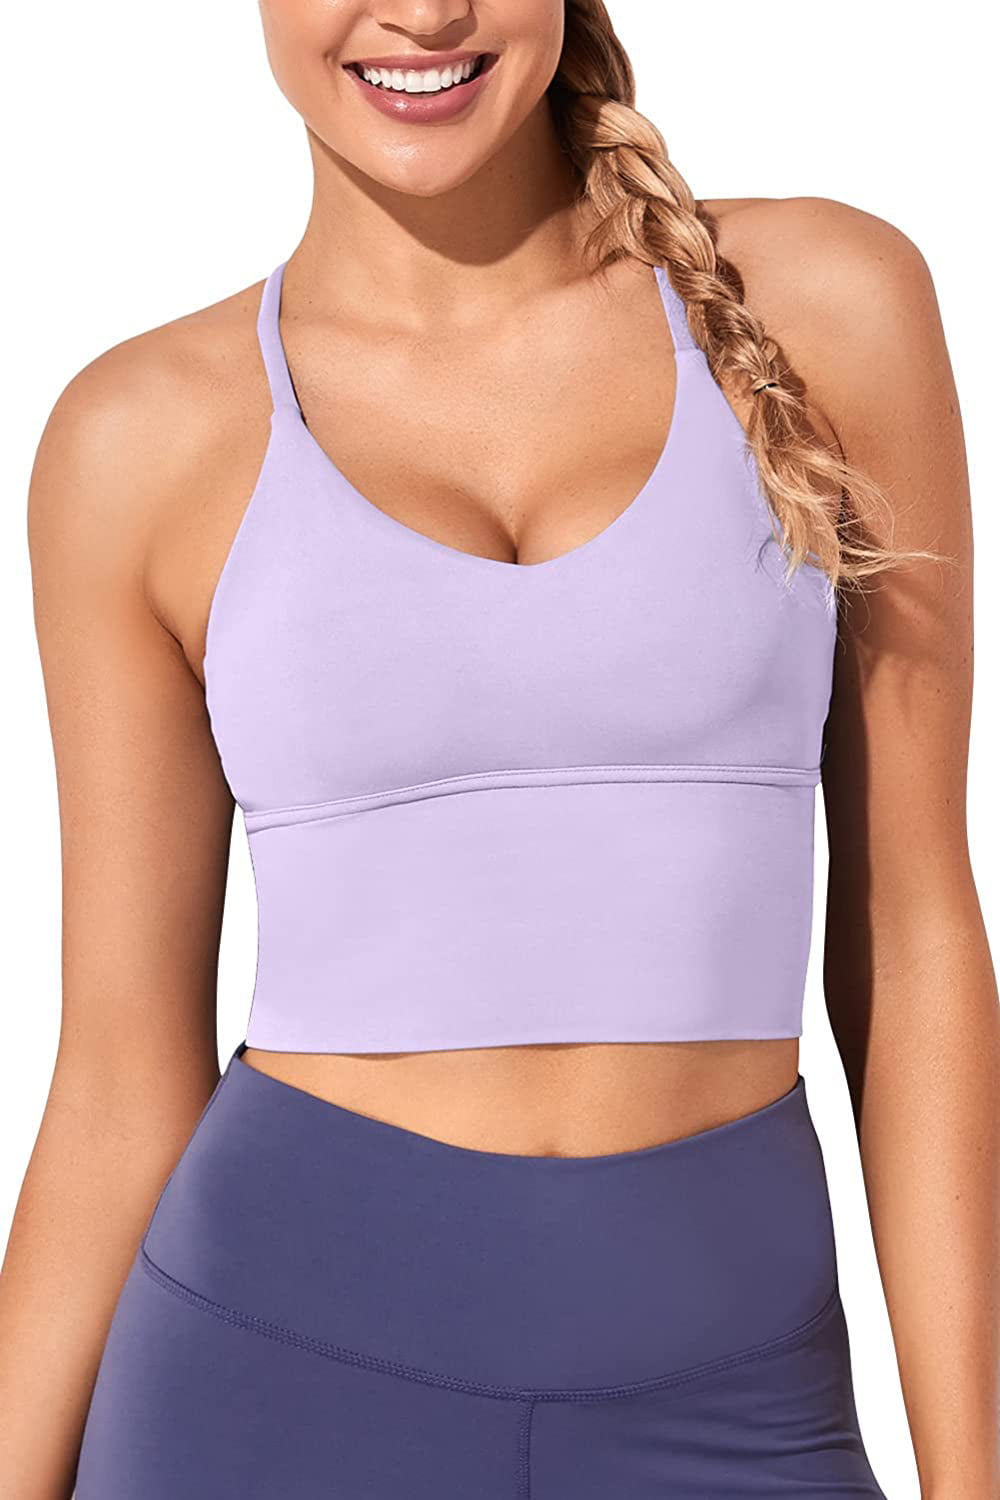 Longline Sports Bras for Women-Workout Tops for Women Yoga Camisole Tank Tops with Built in Bra